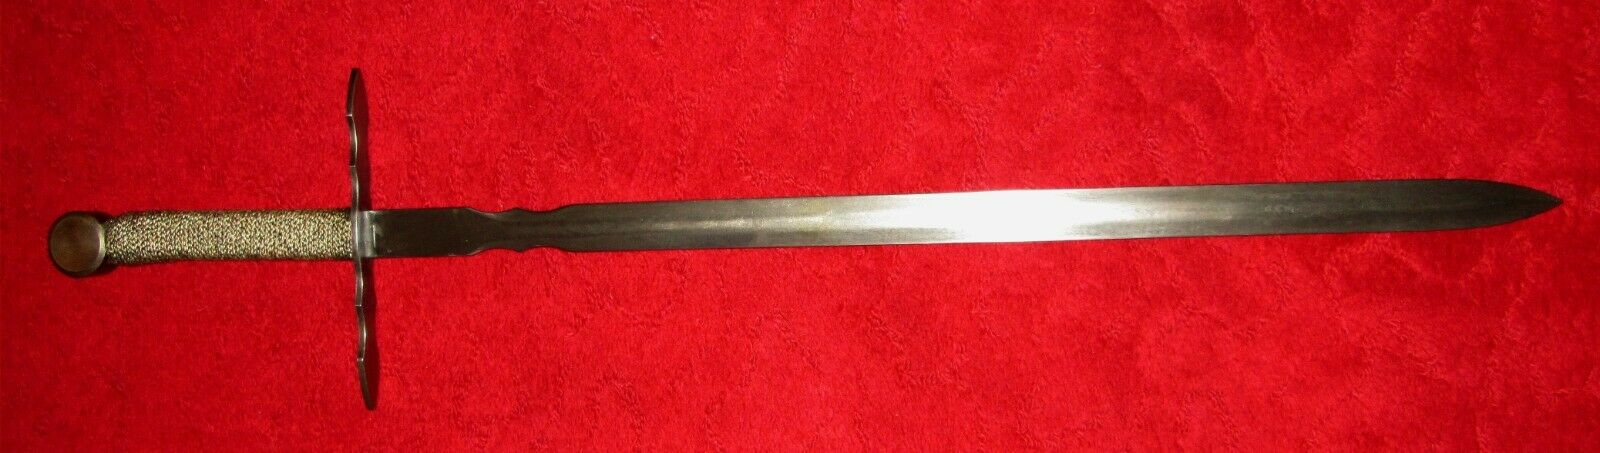 Extremely Rare Badger / Skycastle Medieval Sword / Knives